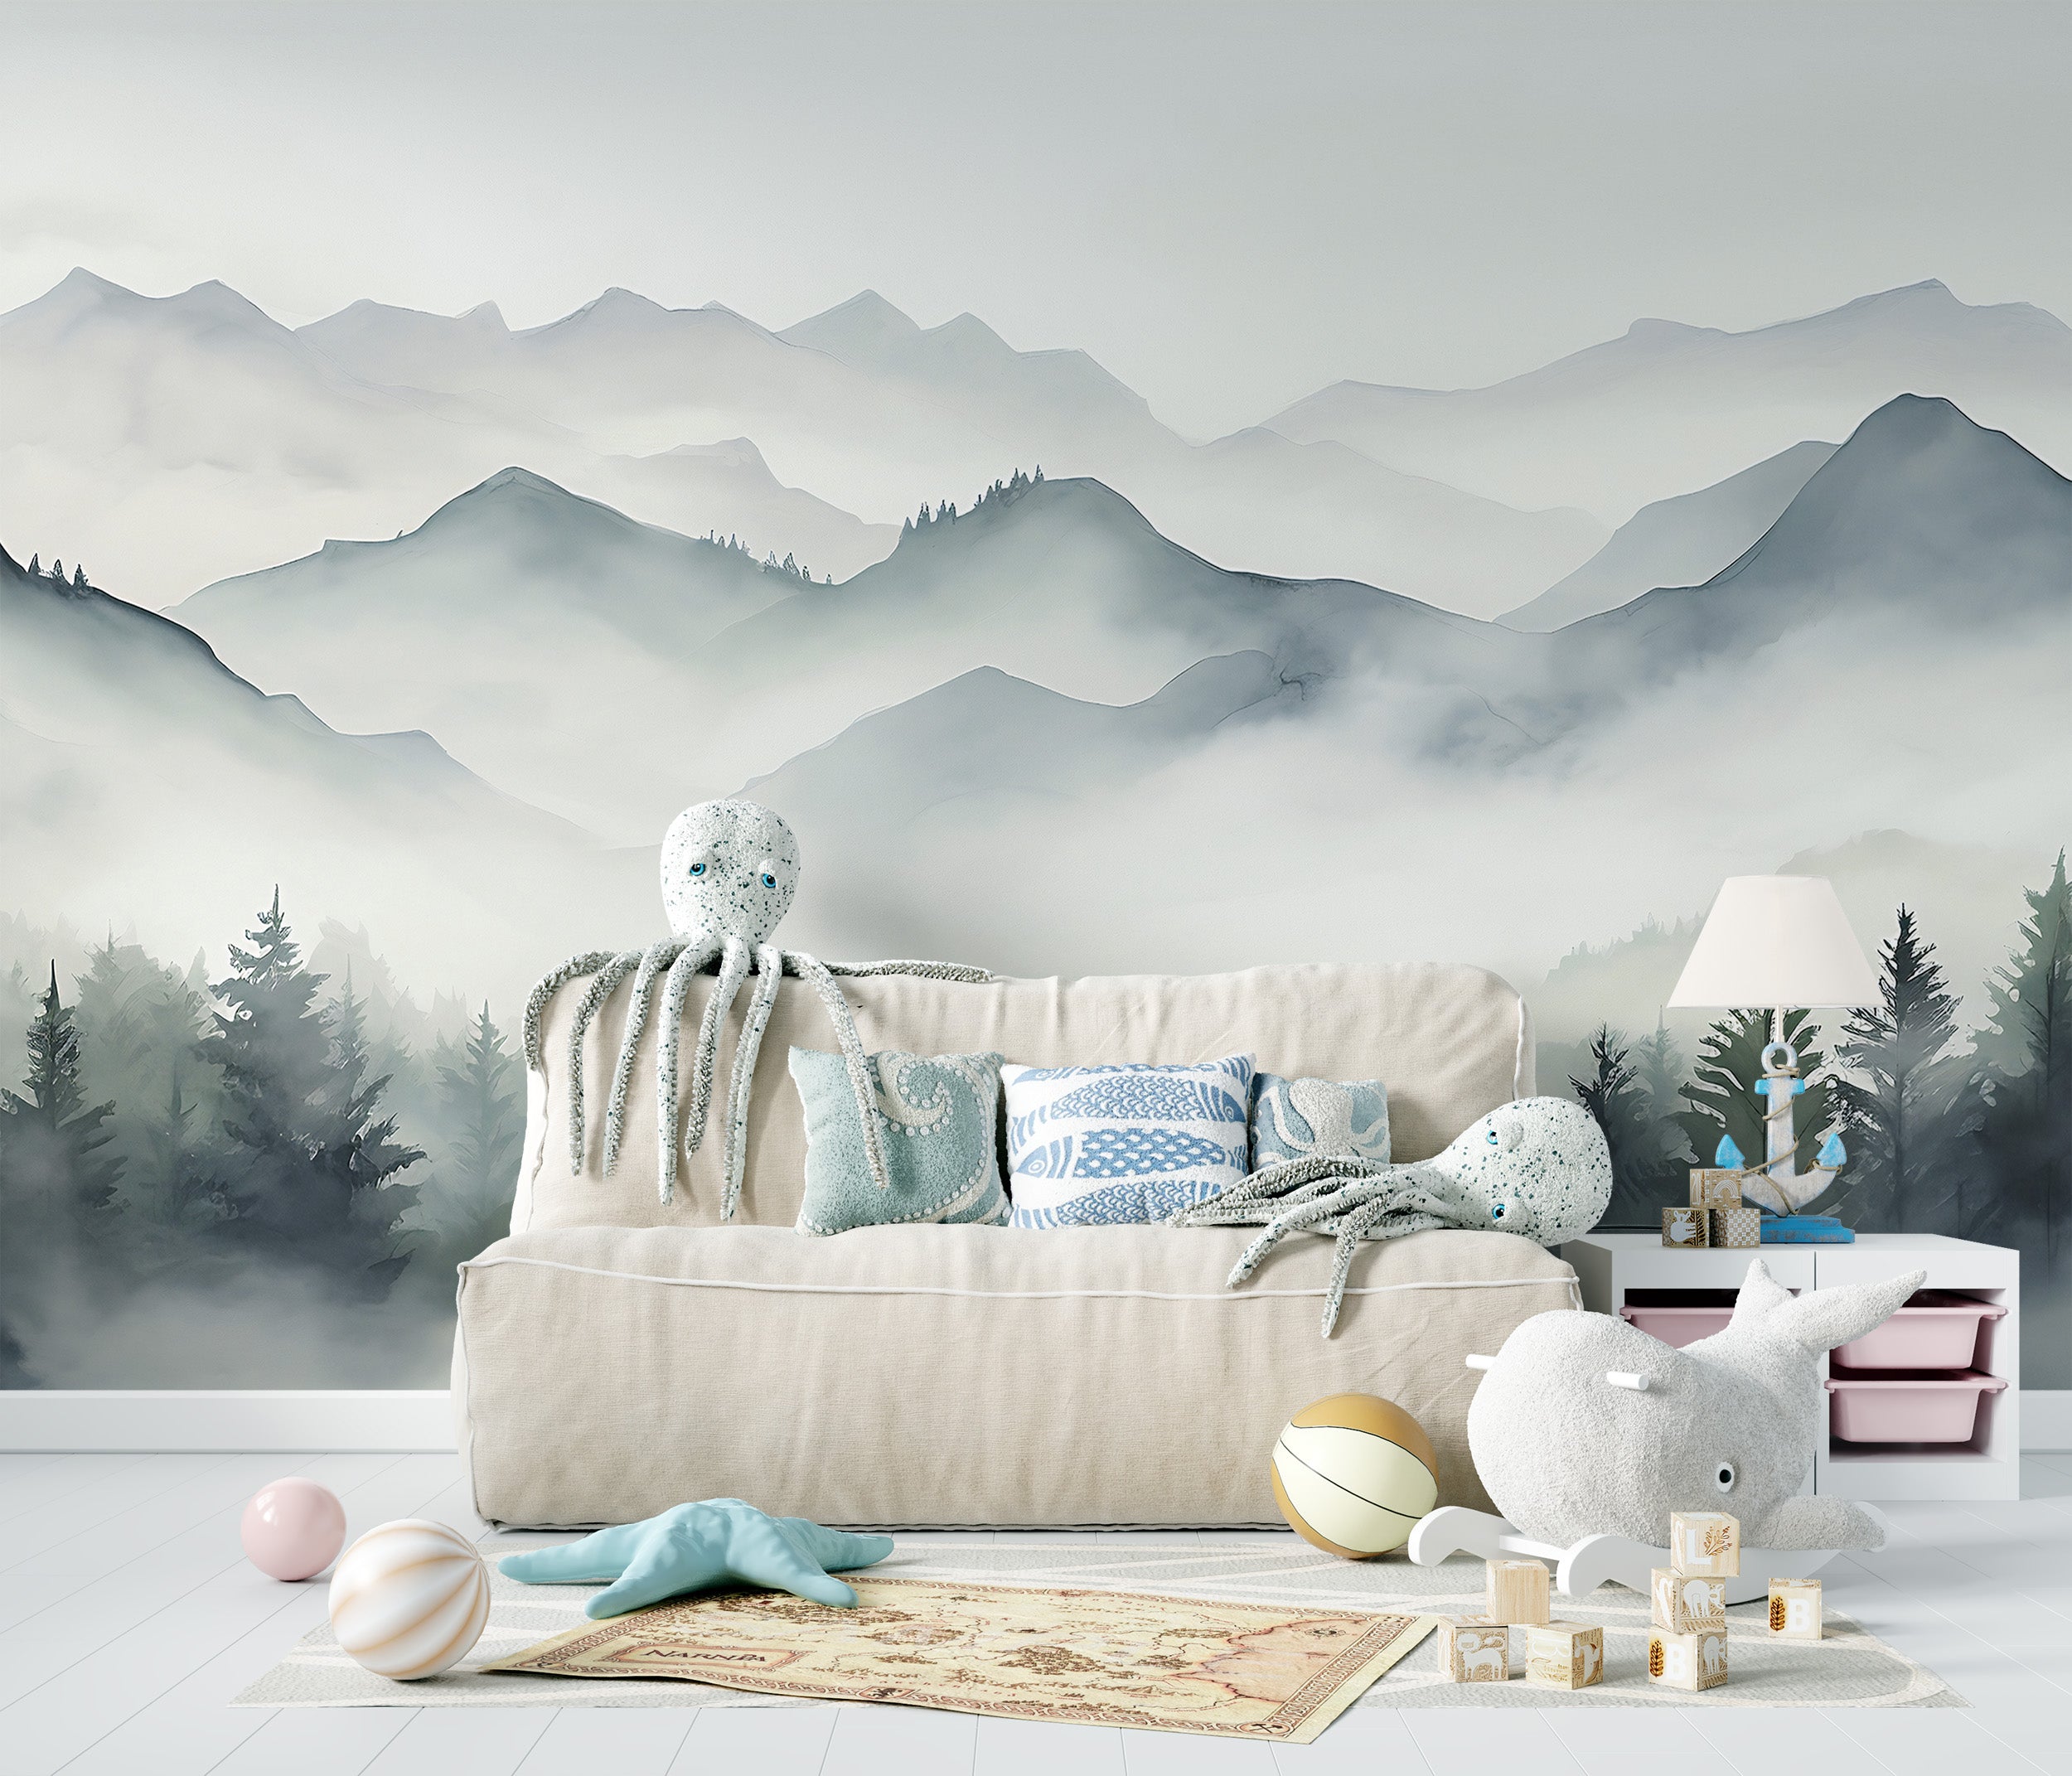 Transform Your Room with Misty Landscape Art